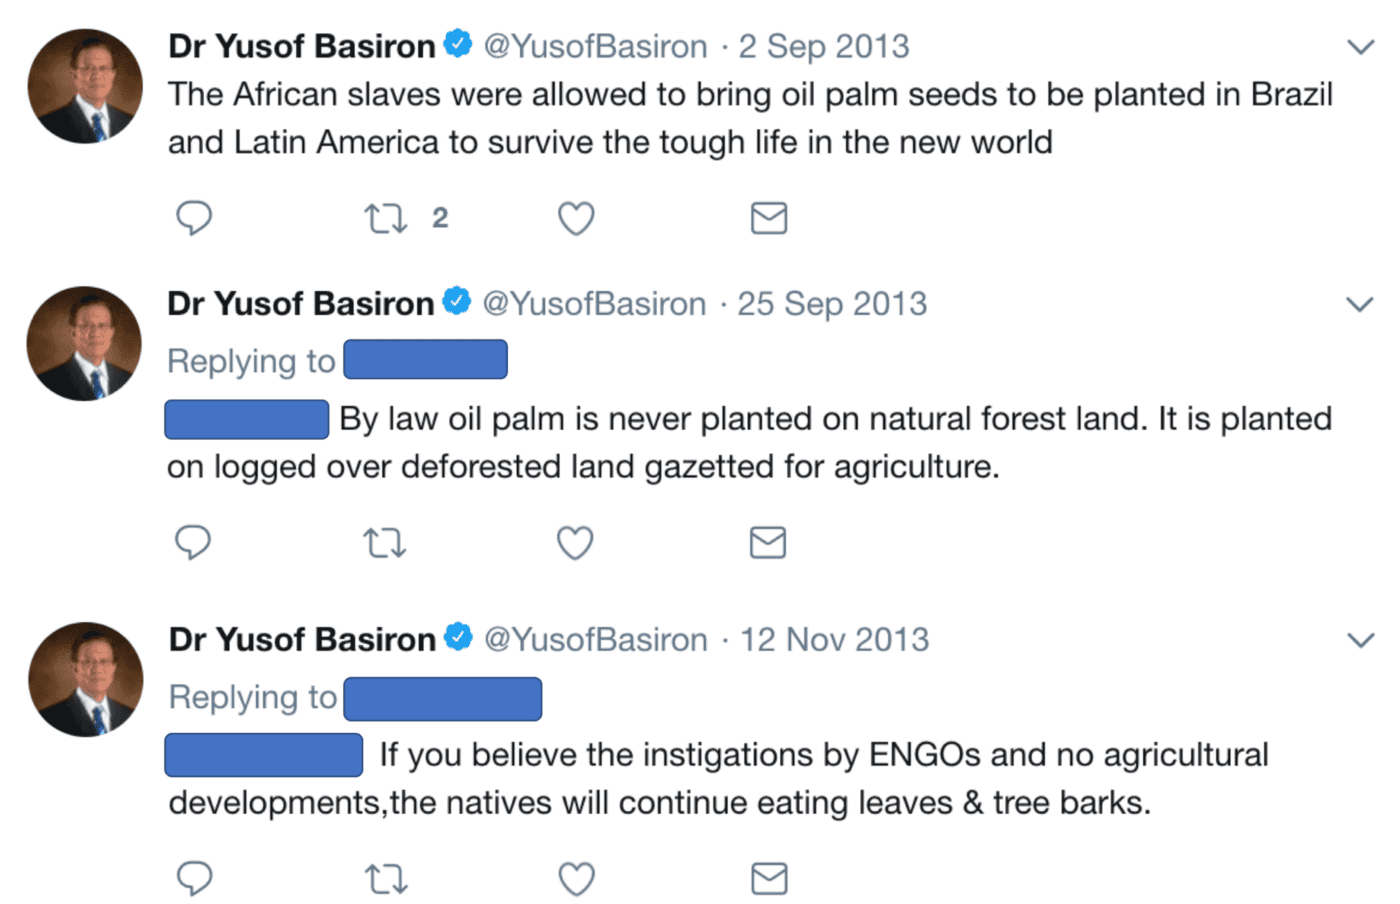 Yusof Basiron uses his Twitter feed to rail against critics of the palm oil industry, on occasion using misleading or inaccurate information